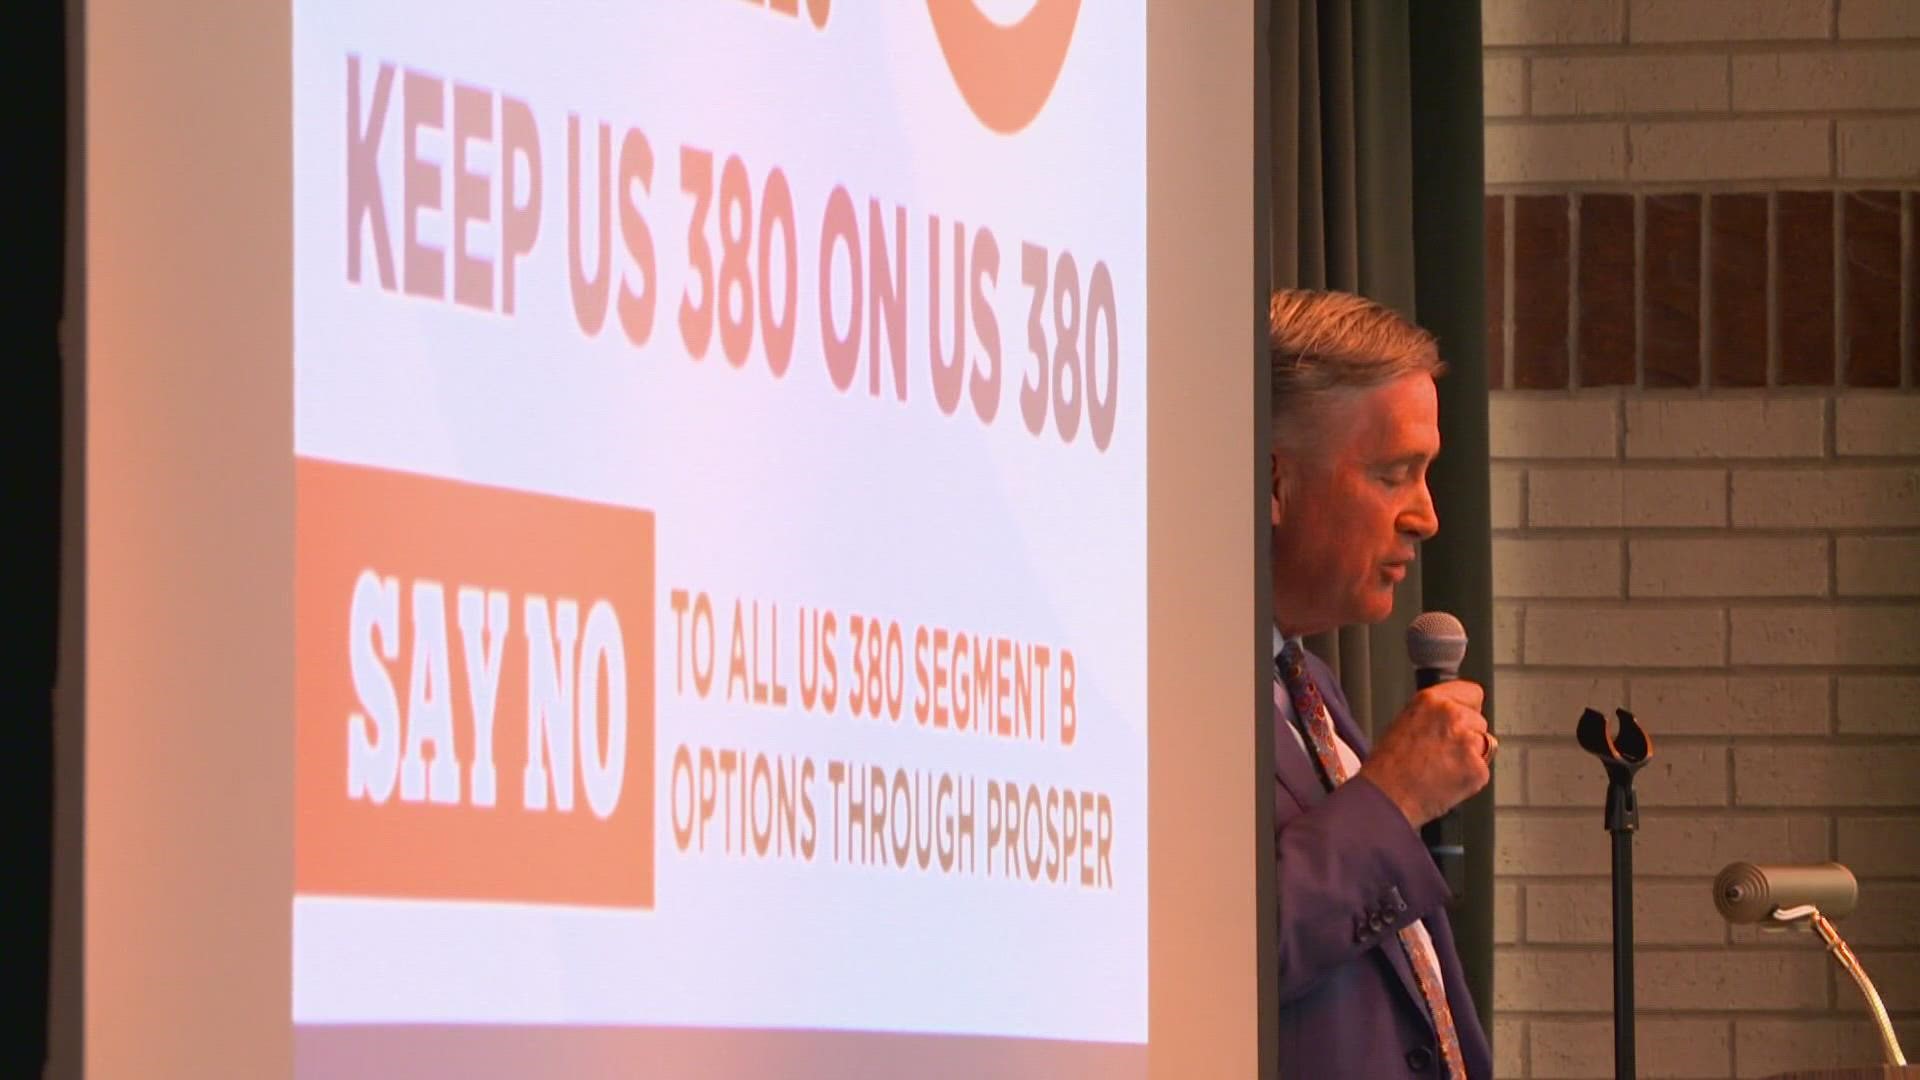 McKinney and Prosper residents held rallies in their own communities to voice opposition to Highway 380 bypass routes that TxDOT has proposed.